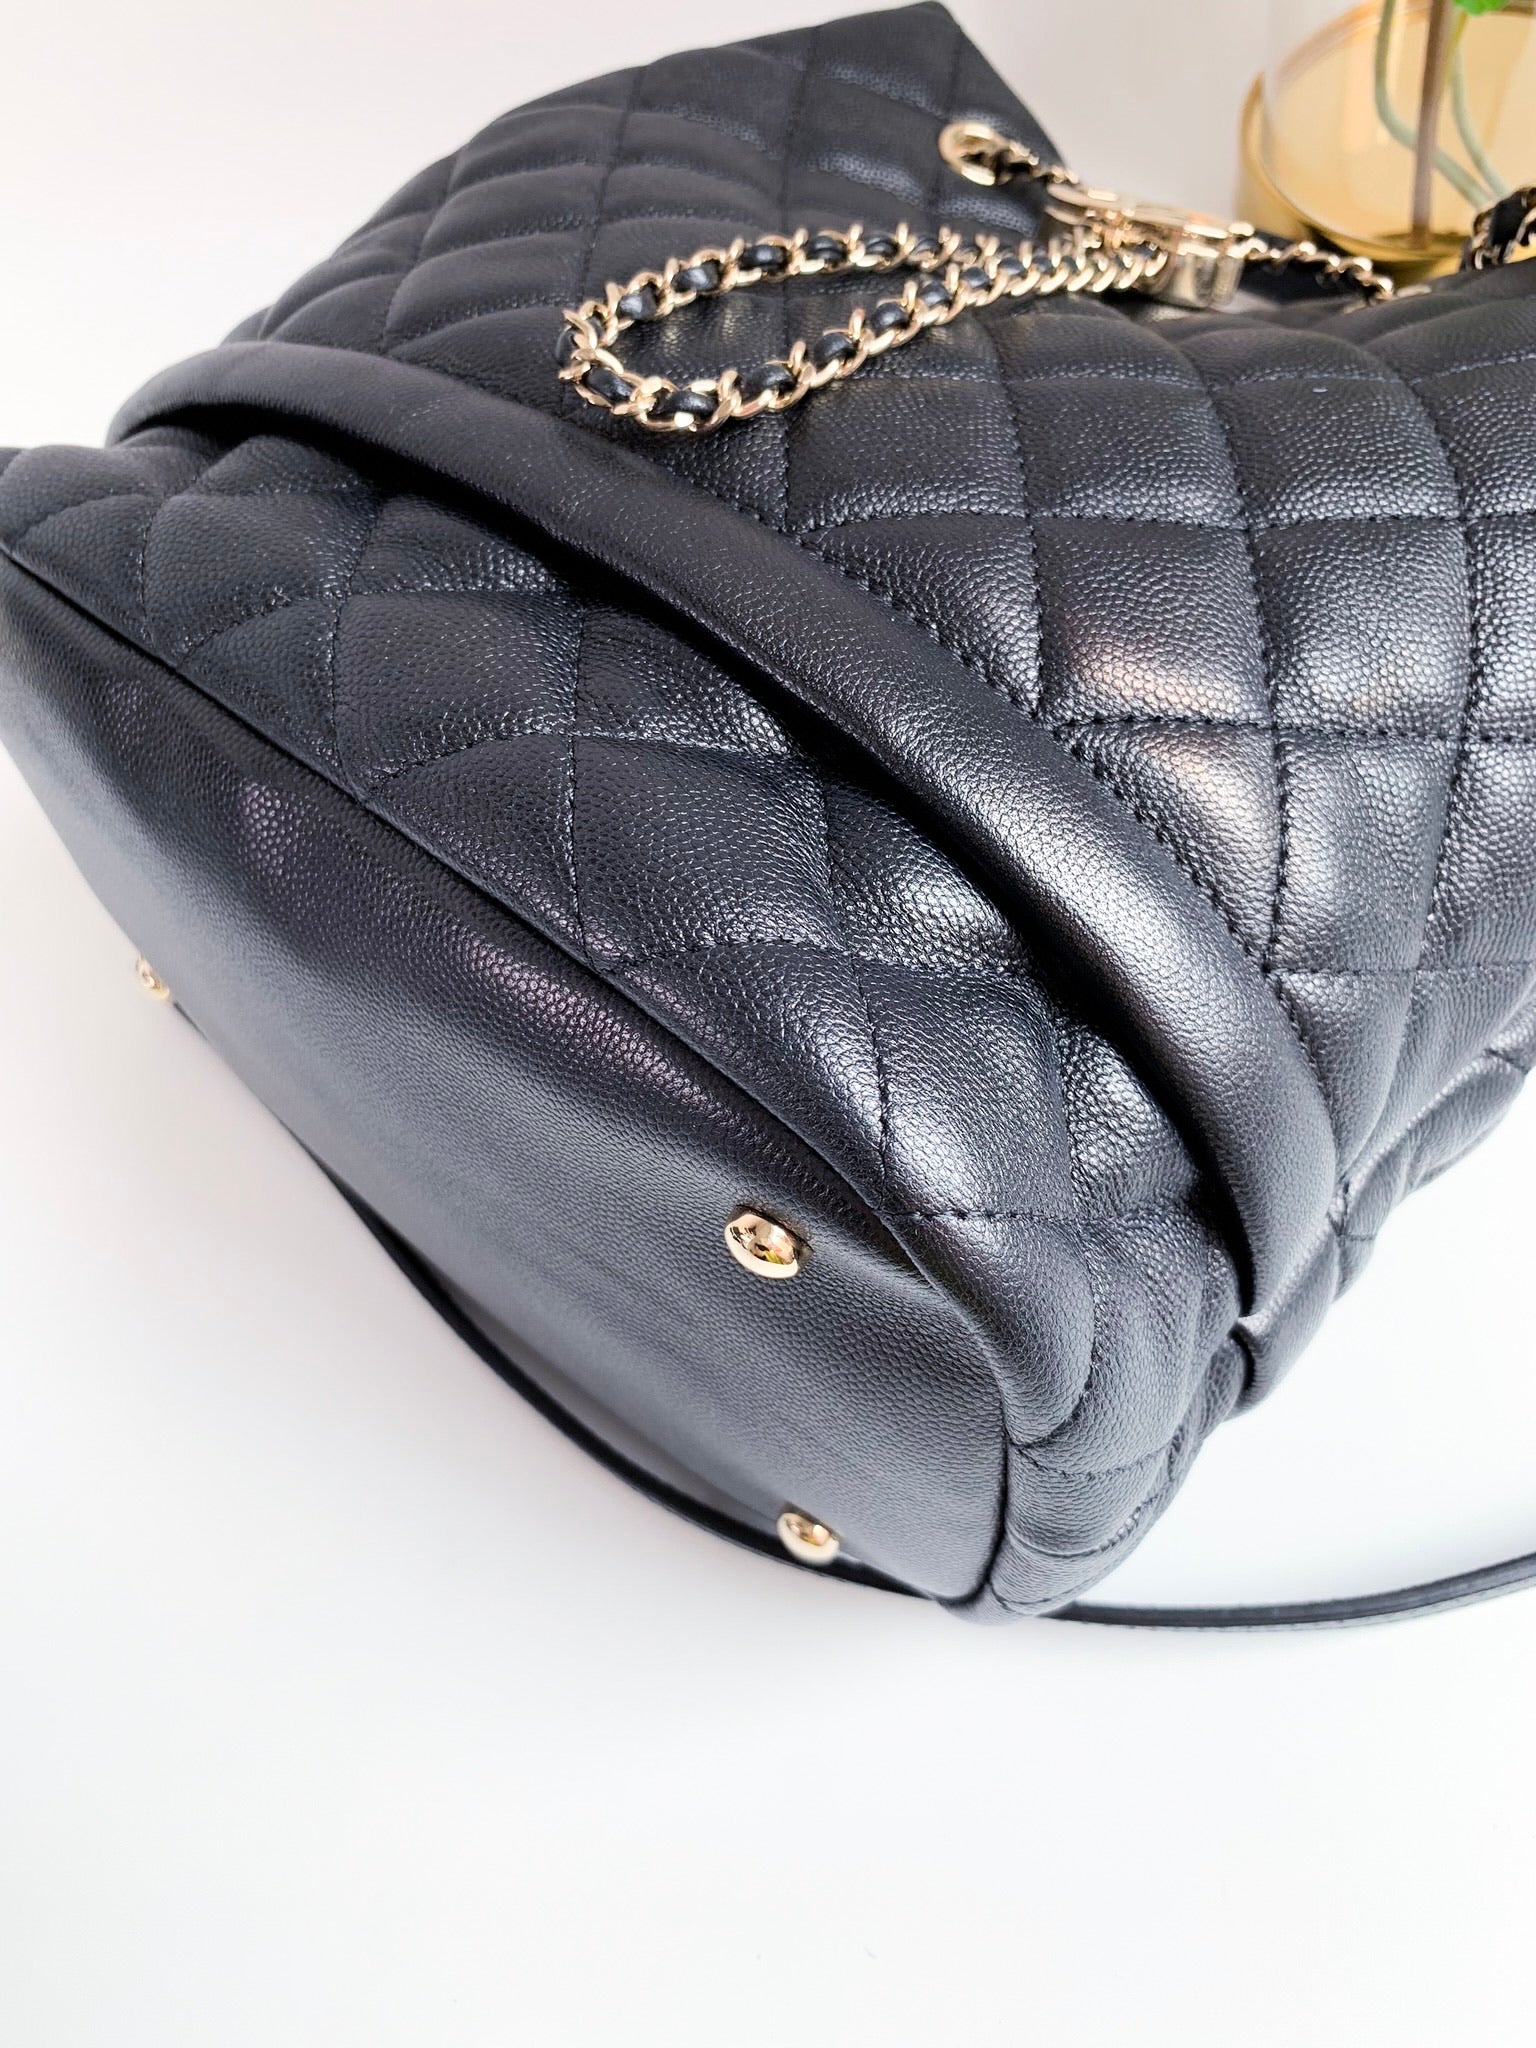 Chanel Quilted My Perfect CC Bucket Drawstring Bag Black Lambskin – Coco  Approved Studio